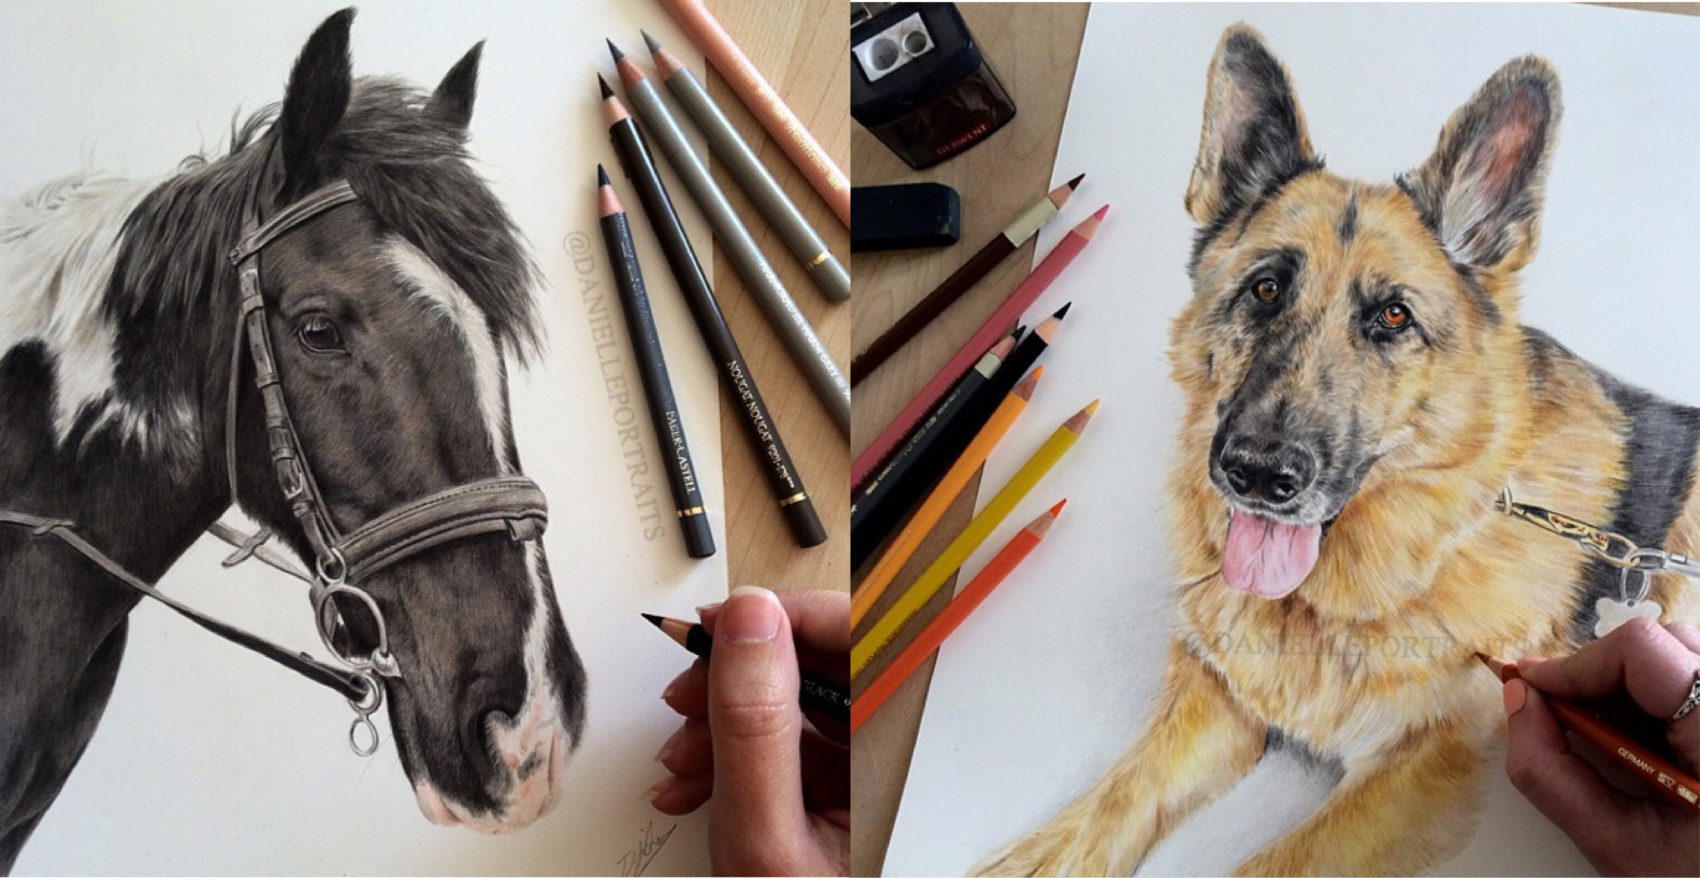 Incredible Animal Pencil Drawings by British Artist Danielle Fisher